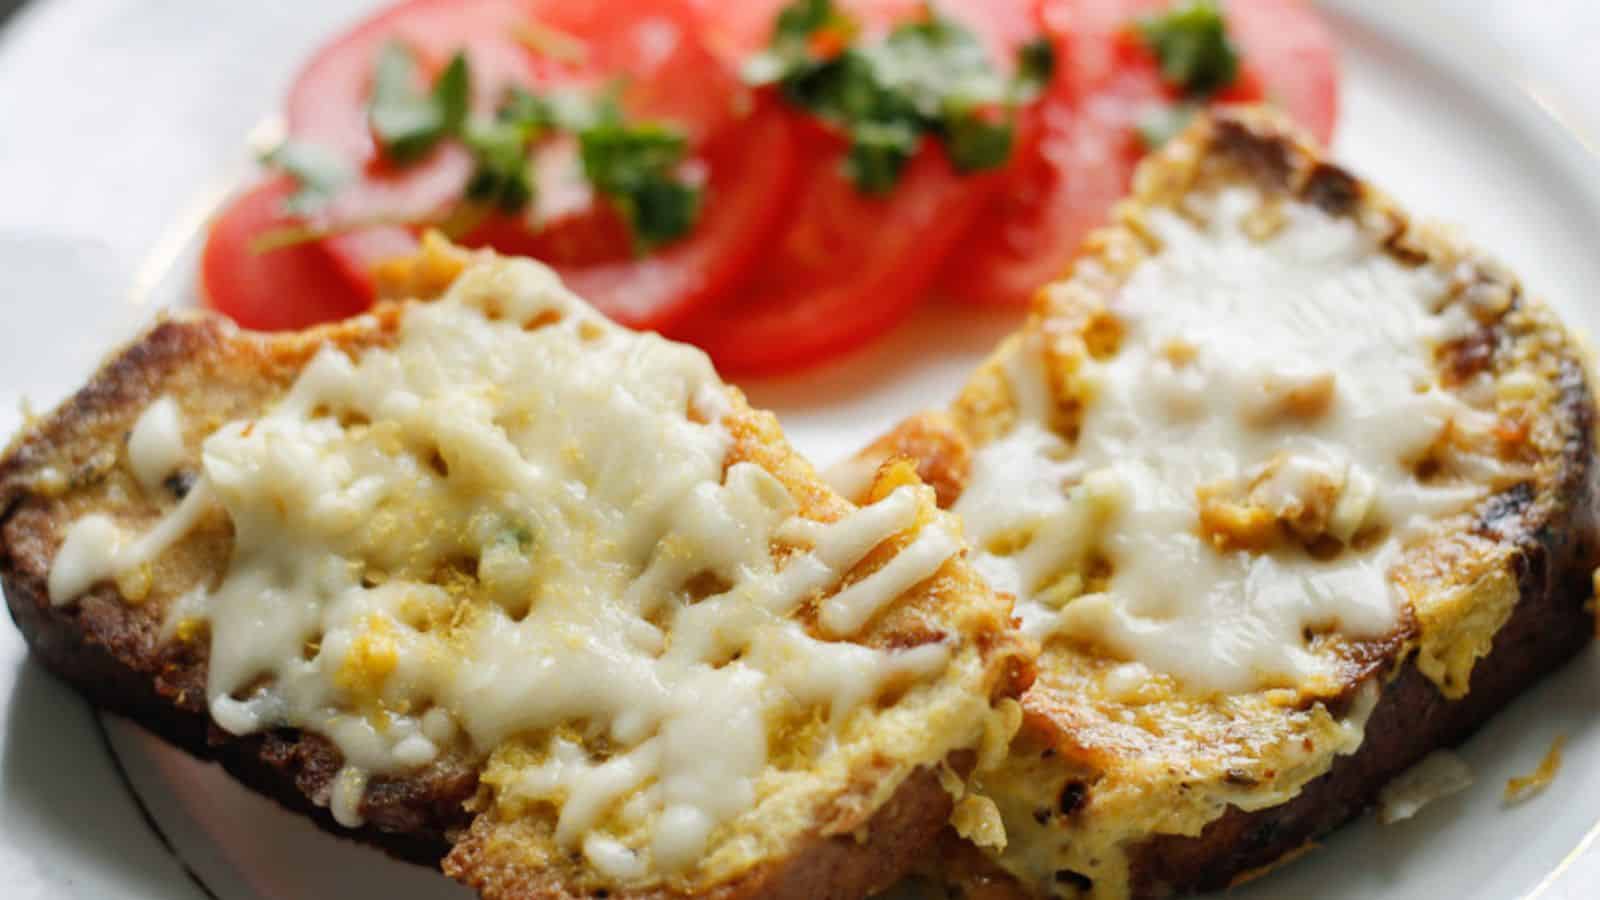 A slice of bread with cheese and tomatoes on a plate.